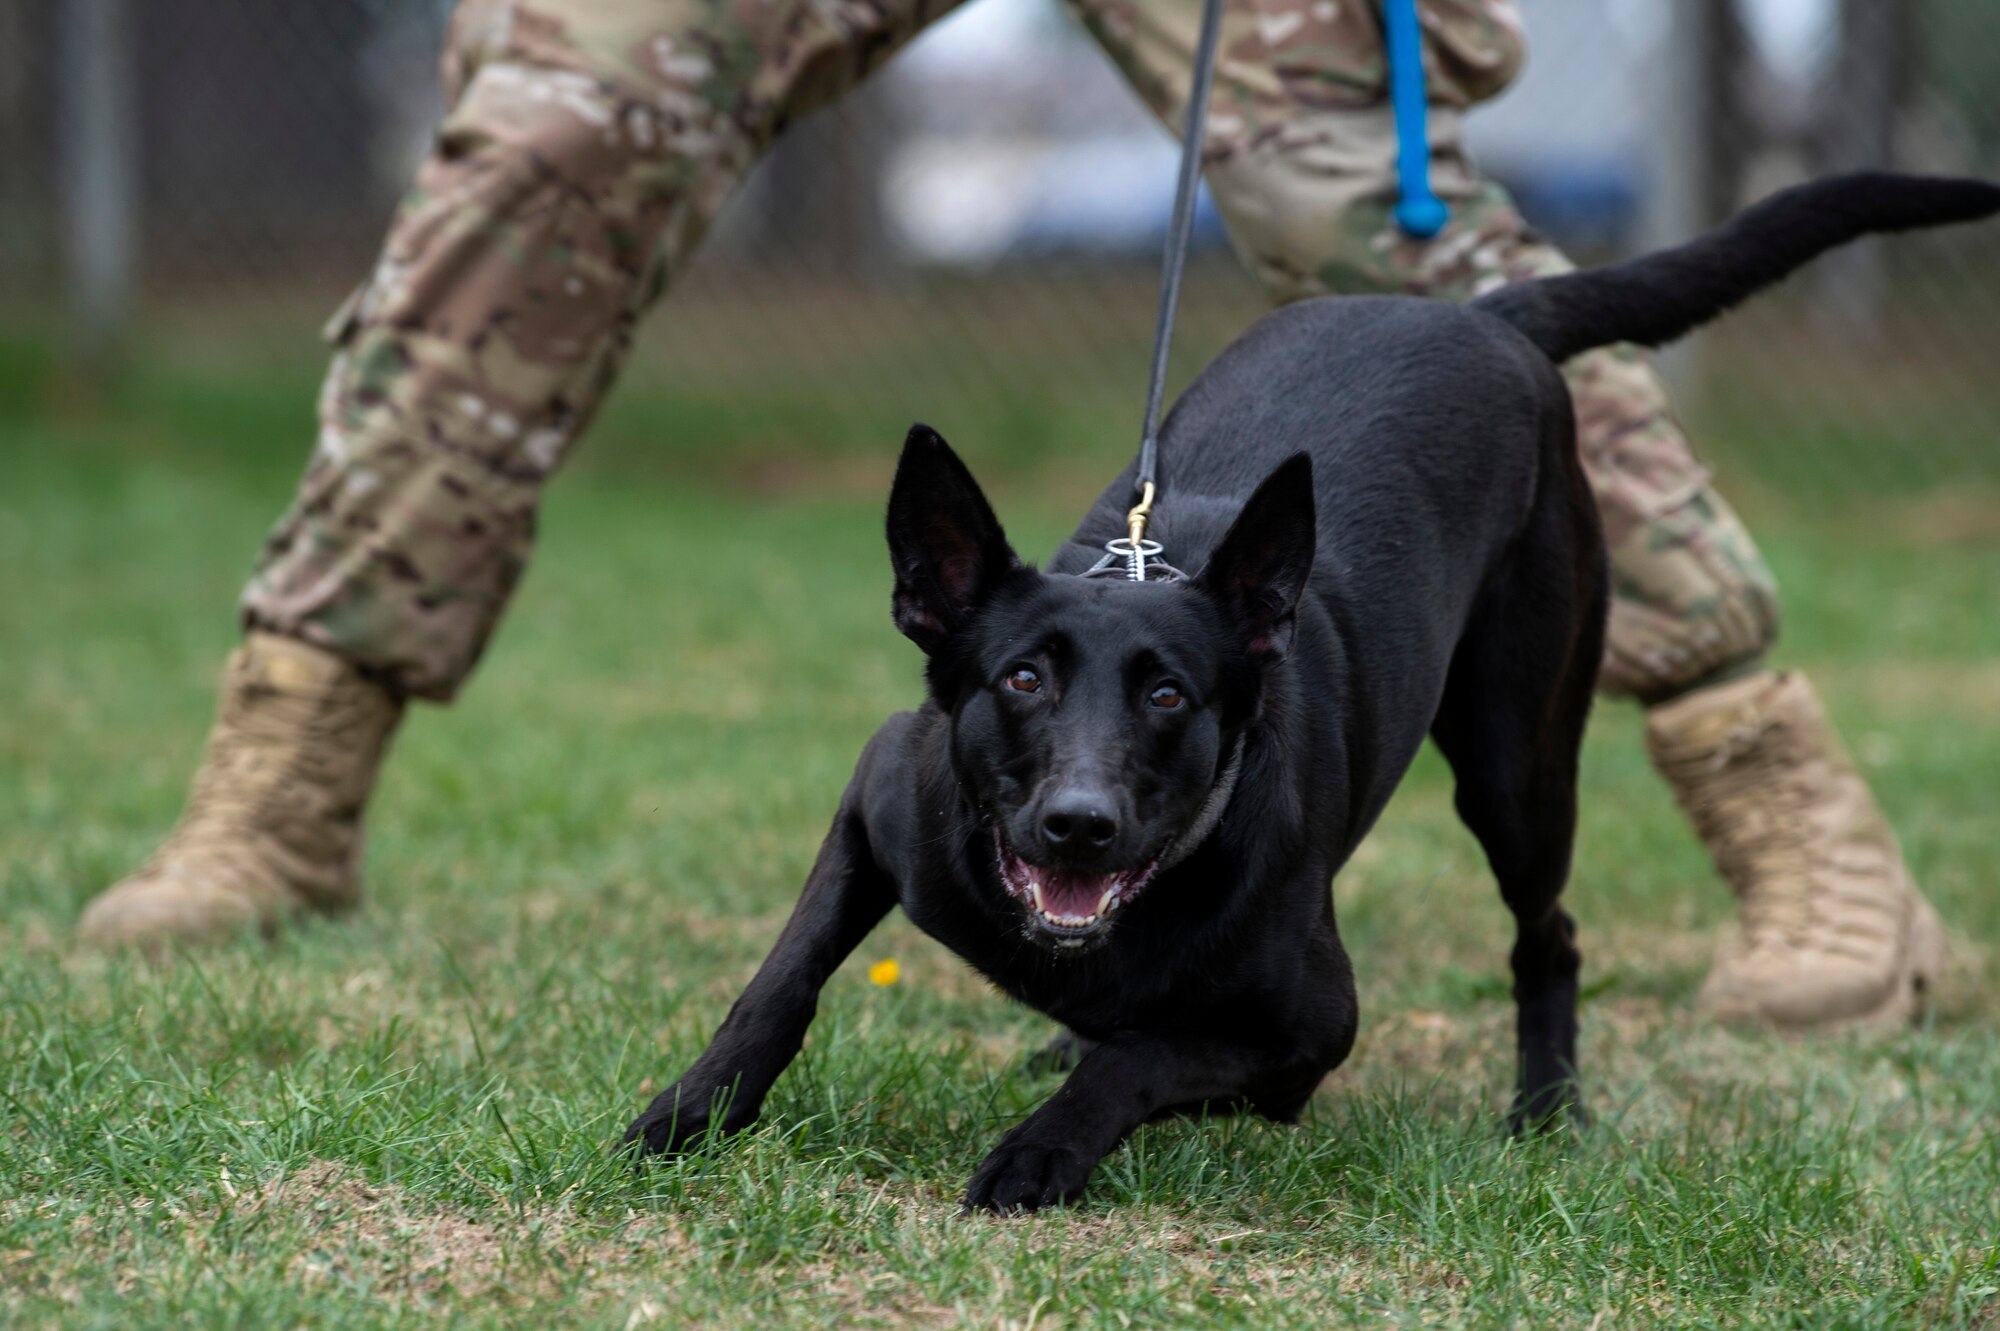 U.S. Air Force Senior Airman Erik Barrera, 52nd Security Forces Squadron military working dog handler, and Ccatilina, an MWD, conduct training at Spangdahlem Air Base, Germany, Aug. 1, 2019. MWDs regularly train to exercise obedience and controlled aggression. (U.S. Air Force photo by Airman 1st Class Valerie Seelye)